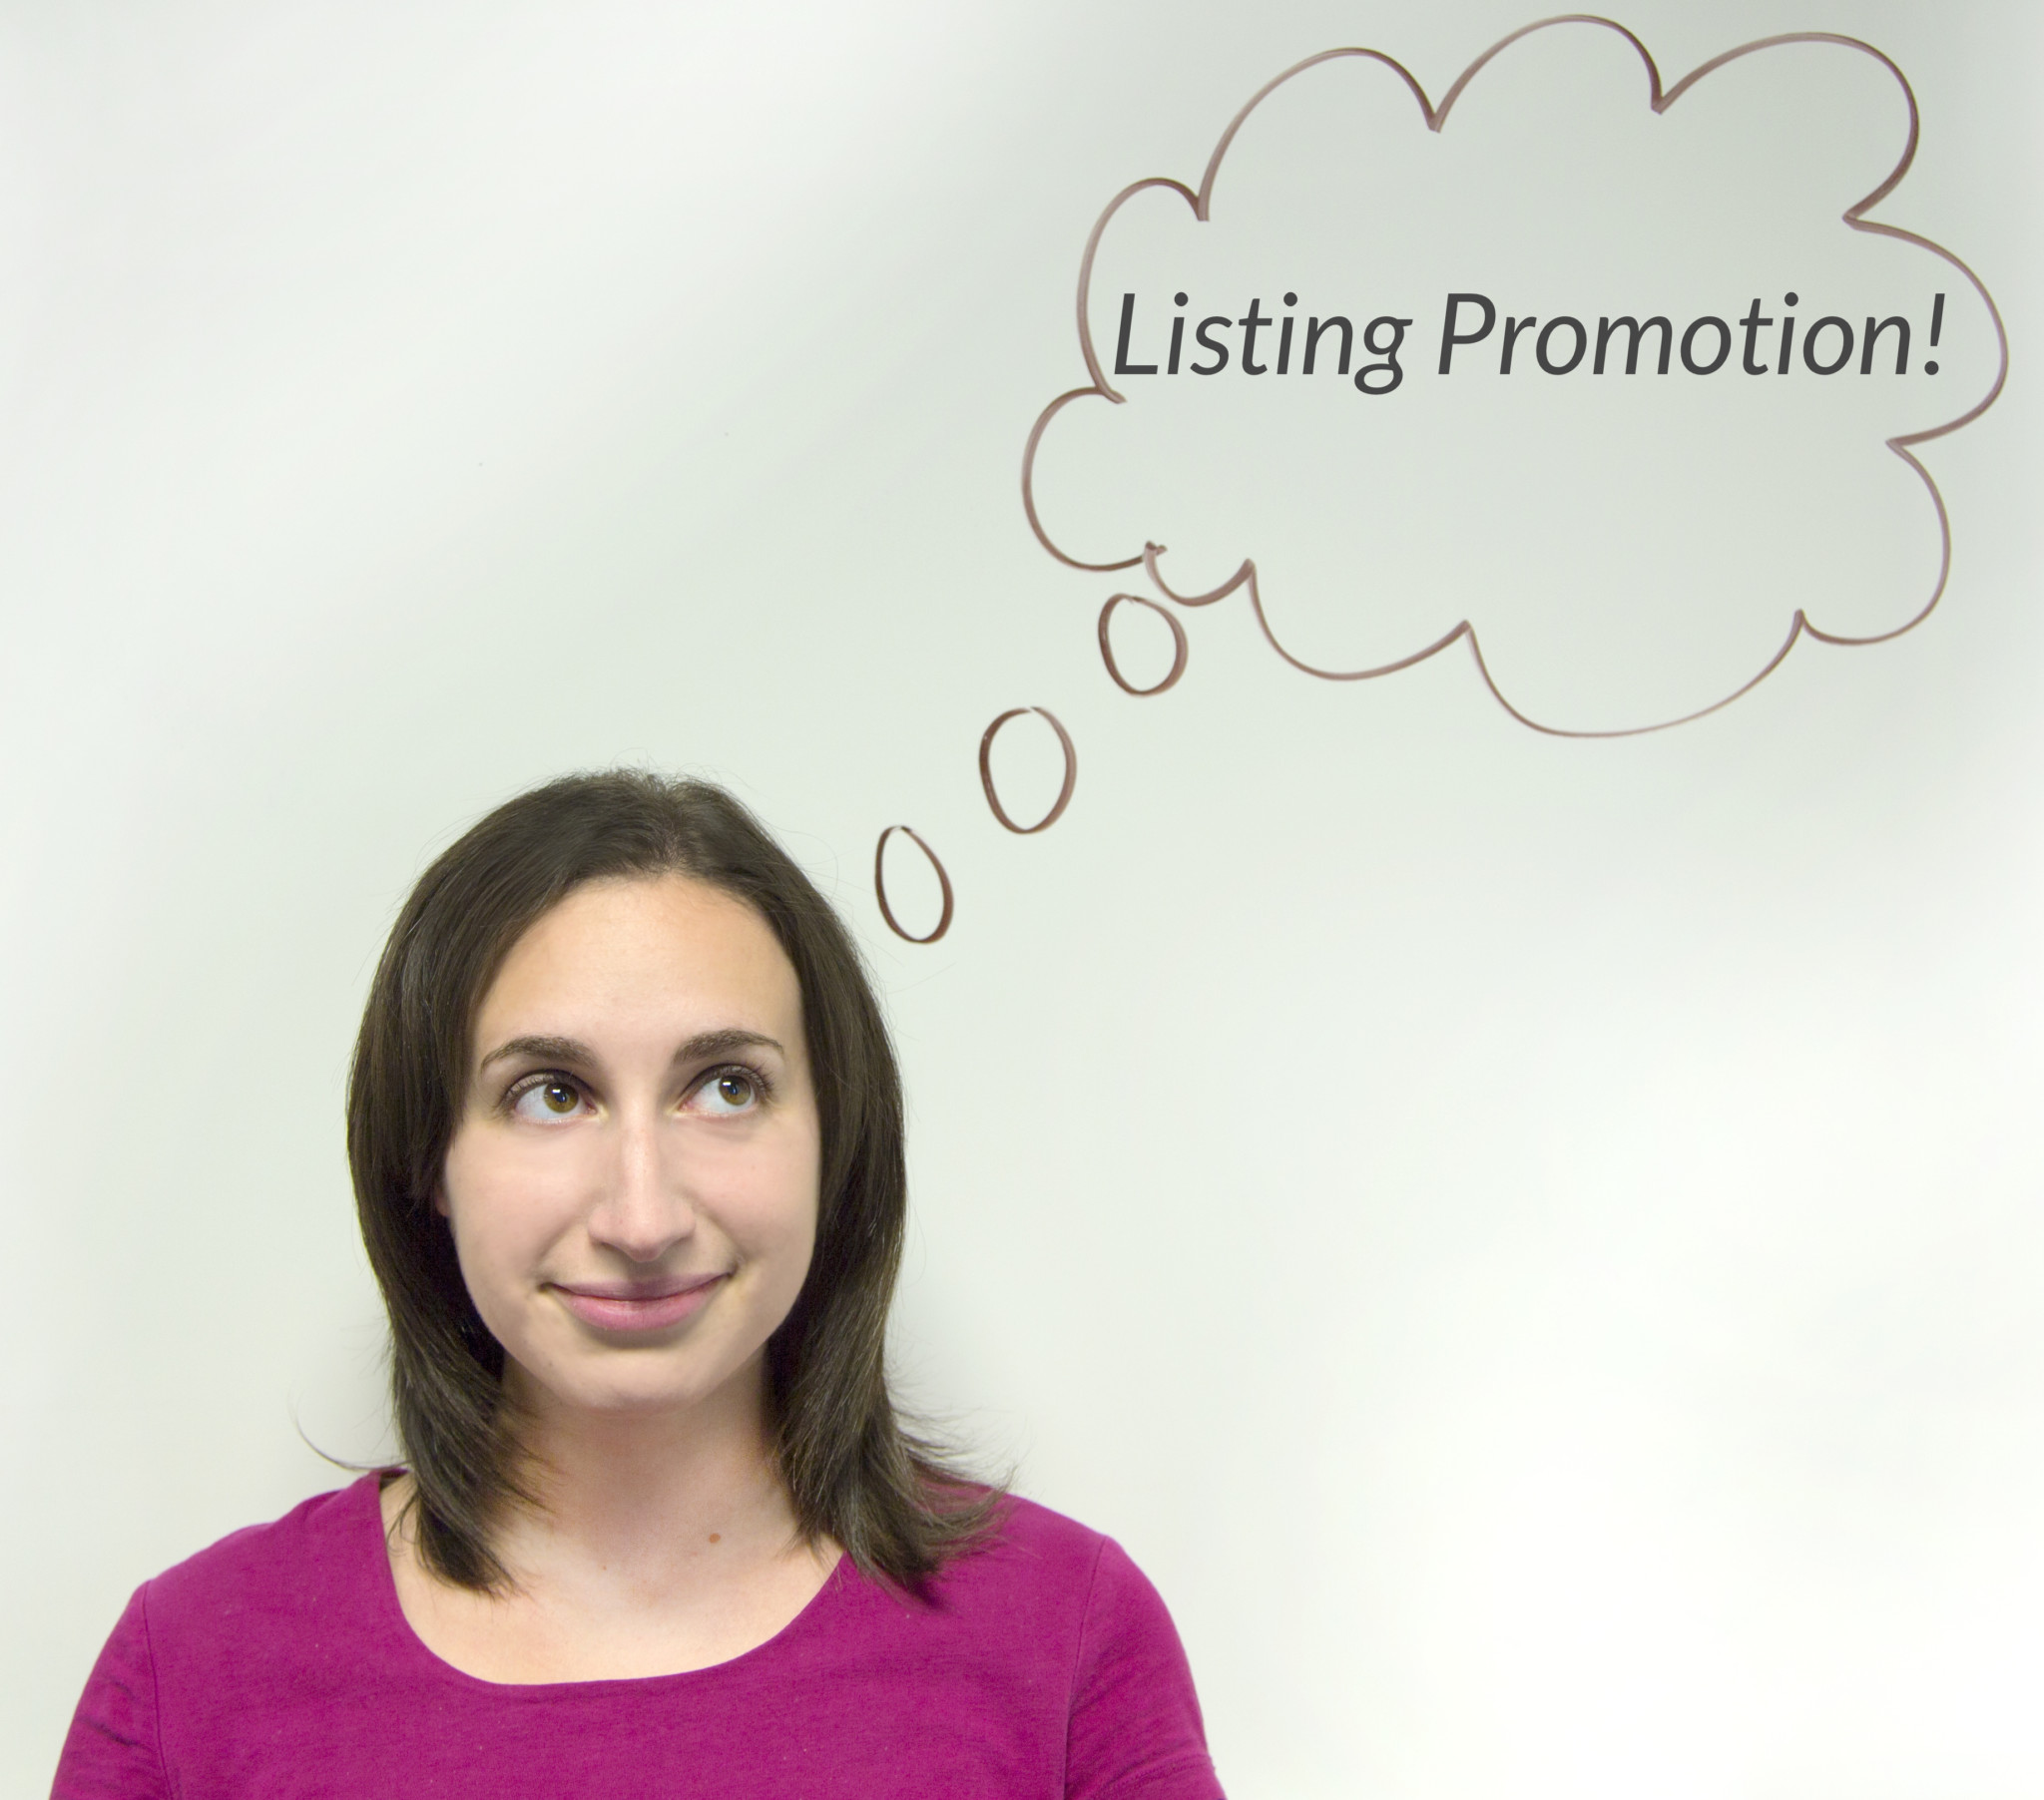 Photo for Part IV – Listing Promotion